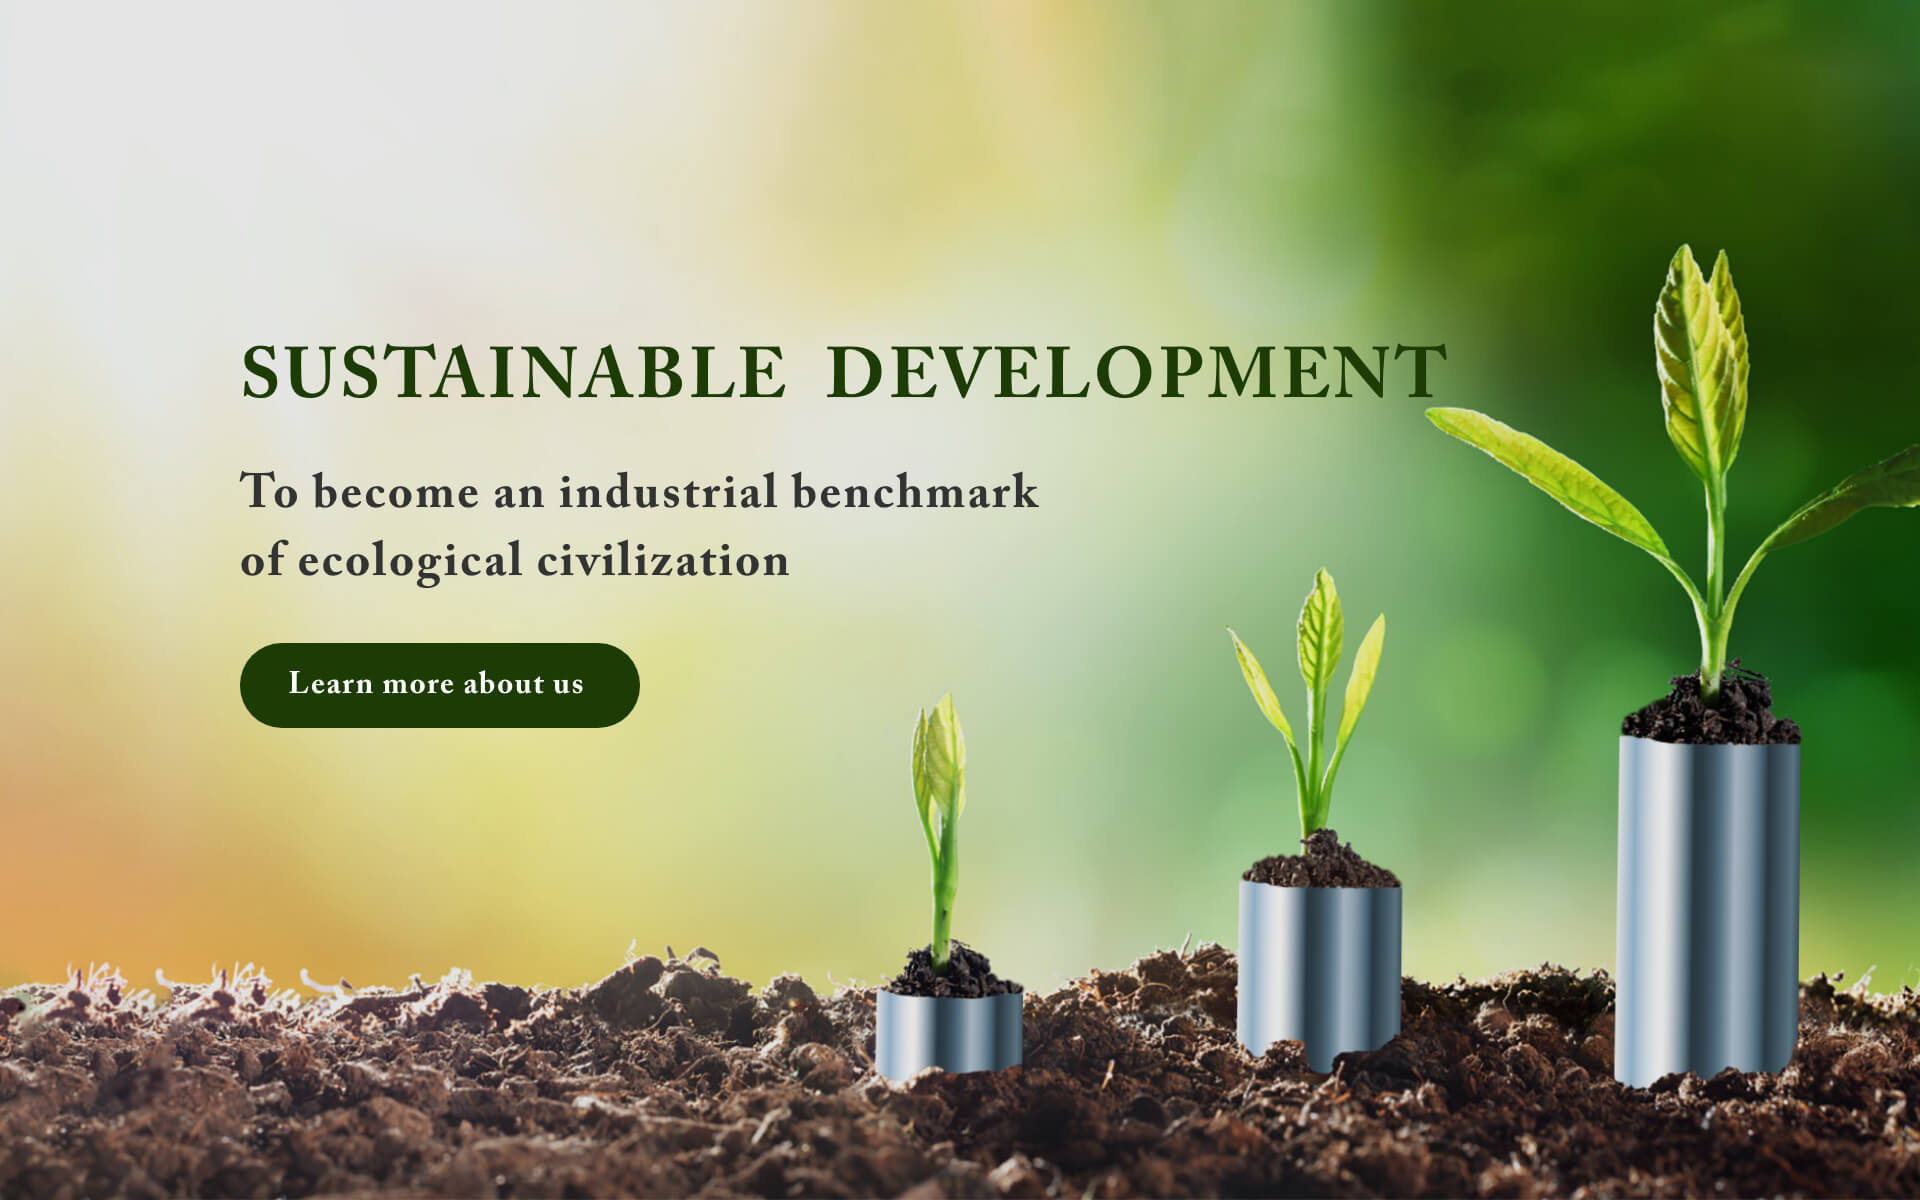 To become an industrial benchmark of ecological civilization